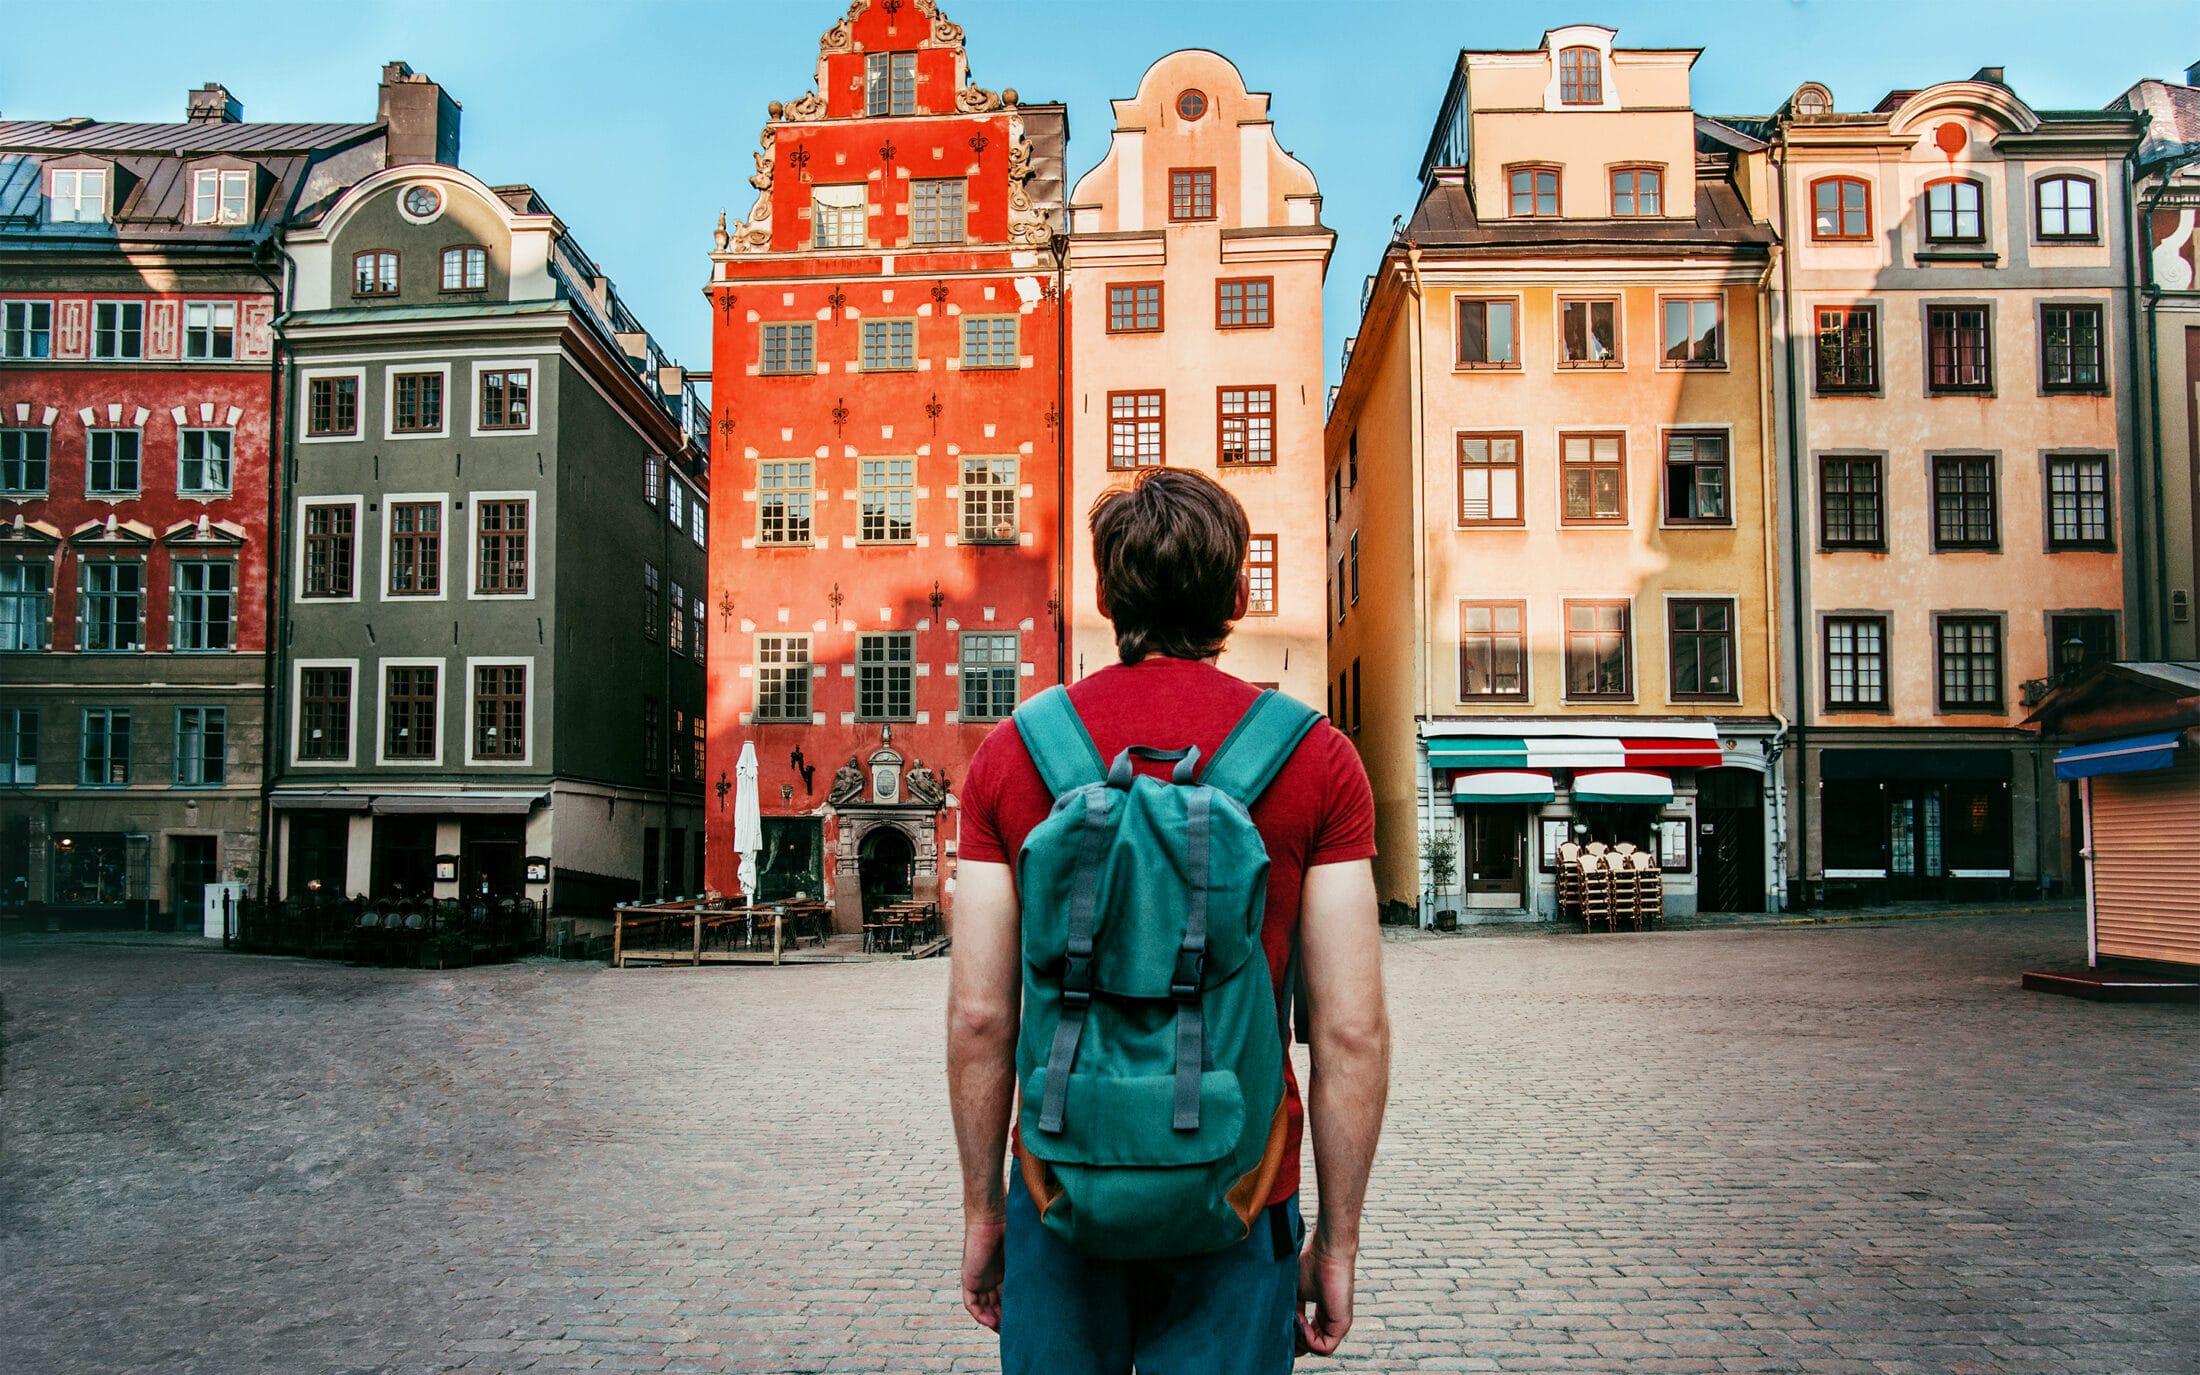 Study in Sweden as an International Student – 2023 Admissions Guide